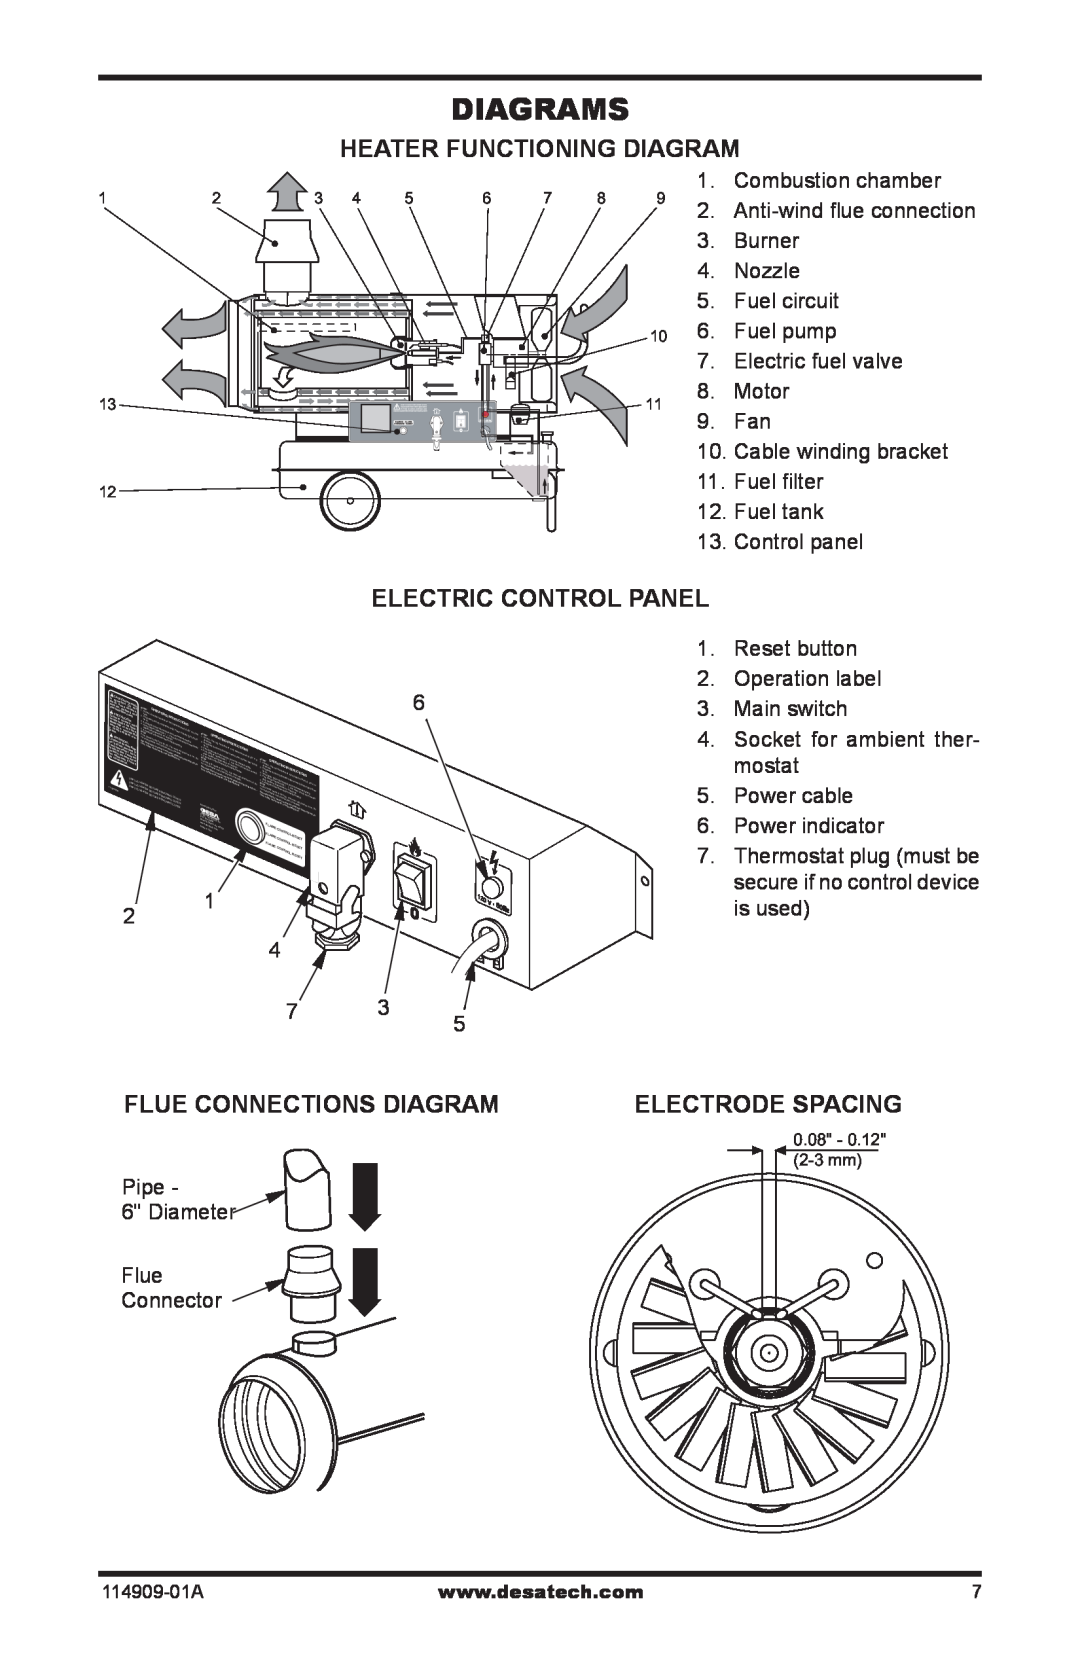 Desa 160-IF Diagrams, Heater Functioning Diagram, Electric Control Panel, Flue Connections Diagram, Electrode Spacing 